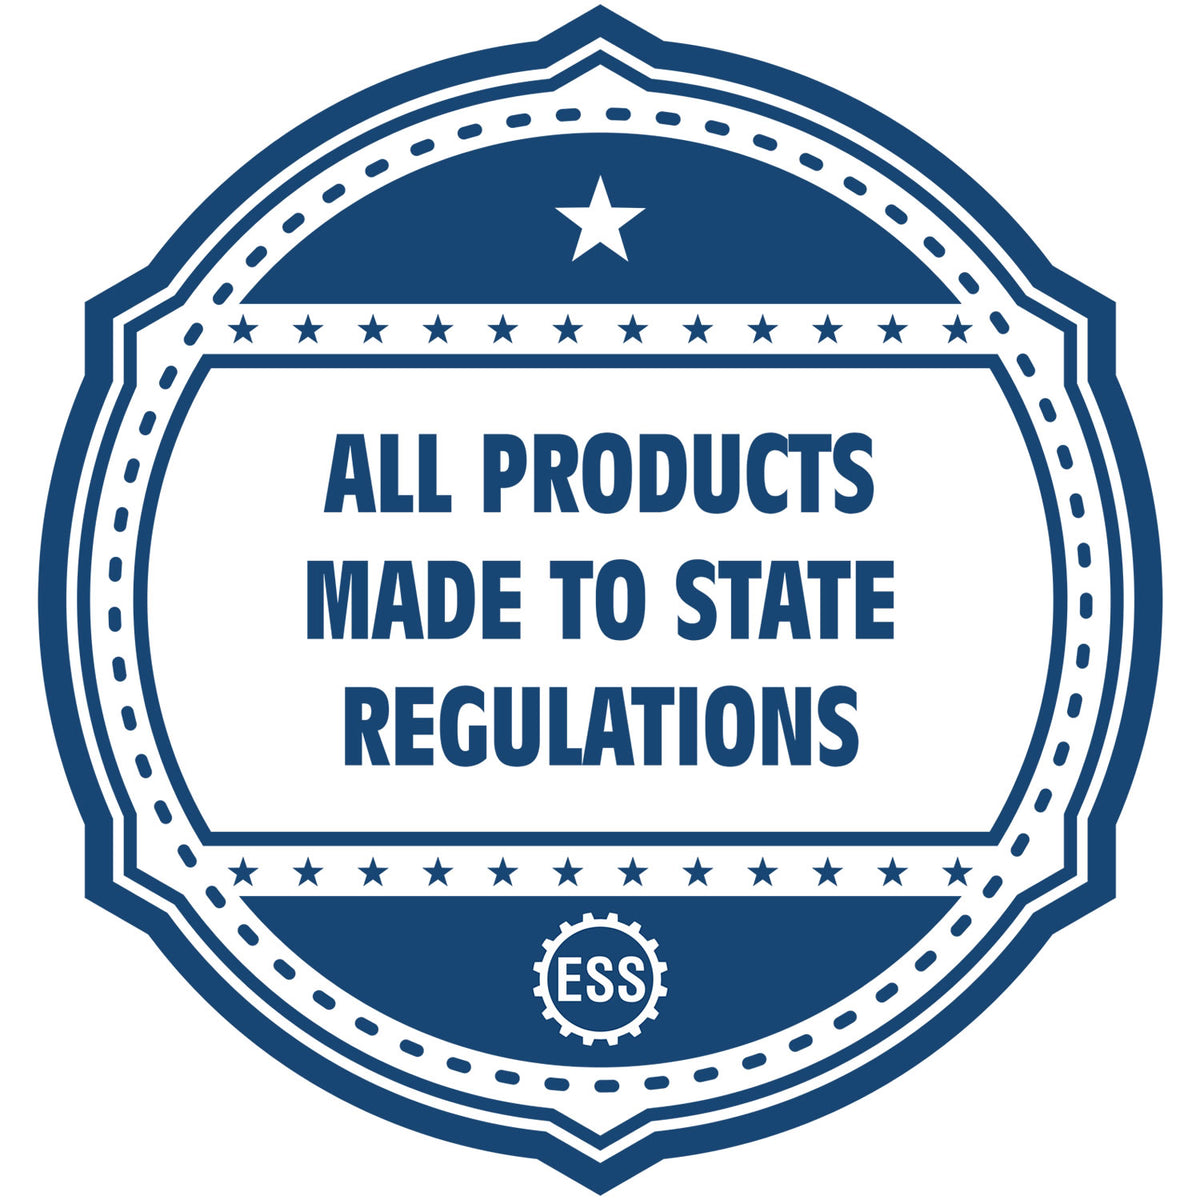 A blue icon or badge for the Gift District of Columbia Engineer Seal showing that this product is made in compliance with state regulations.